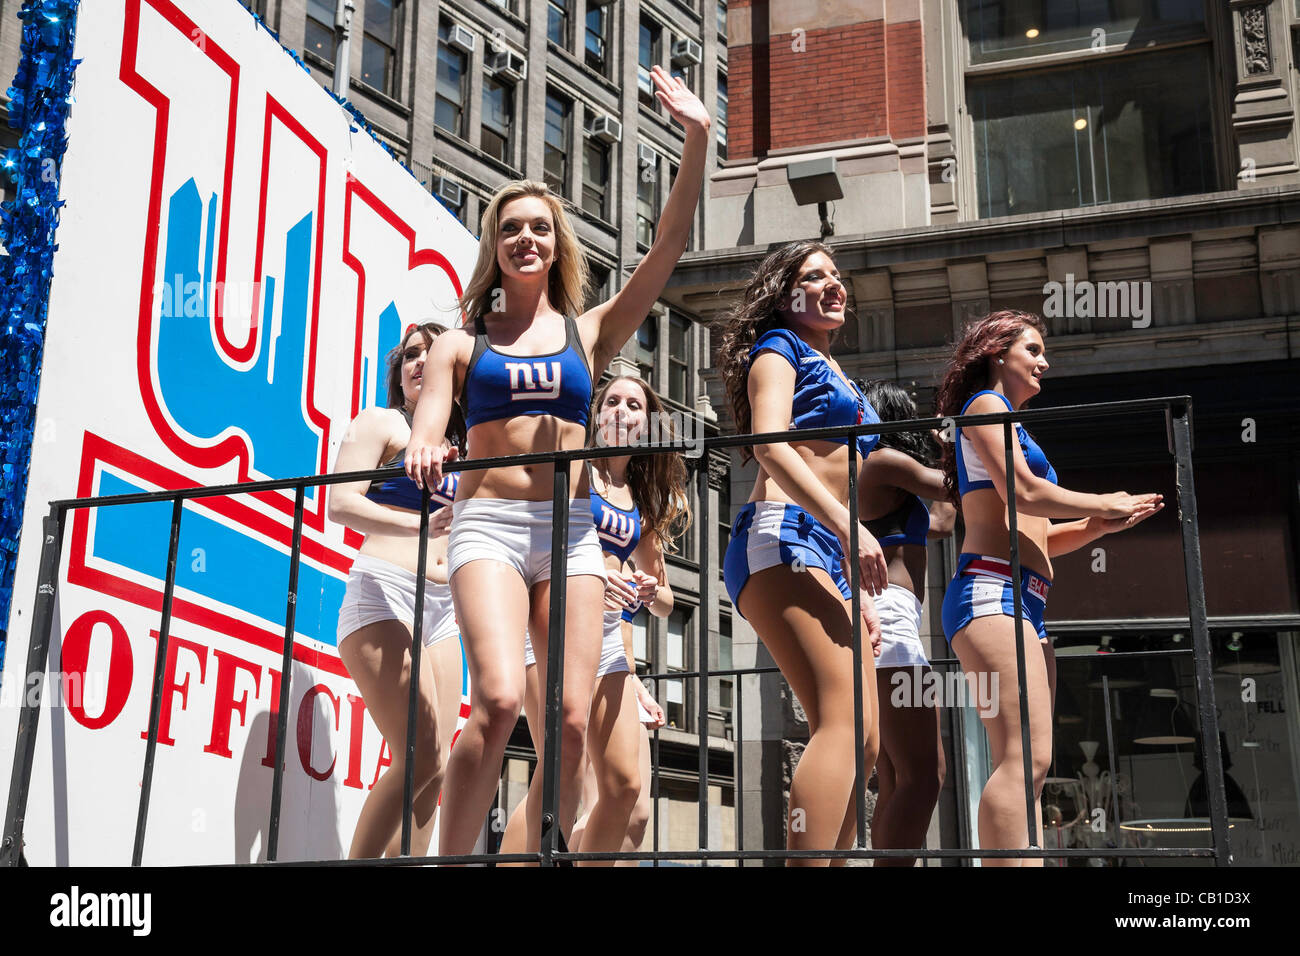 New York, USA. 19 May, 2012. The Dance Parade showcases almost 80 different dance genres and cultures. The “Unofficials” are a group of professional dancers who support the New York NFL Giants Football Team. Stock Photo